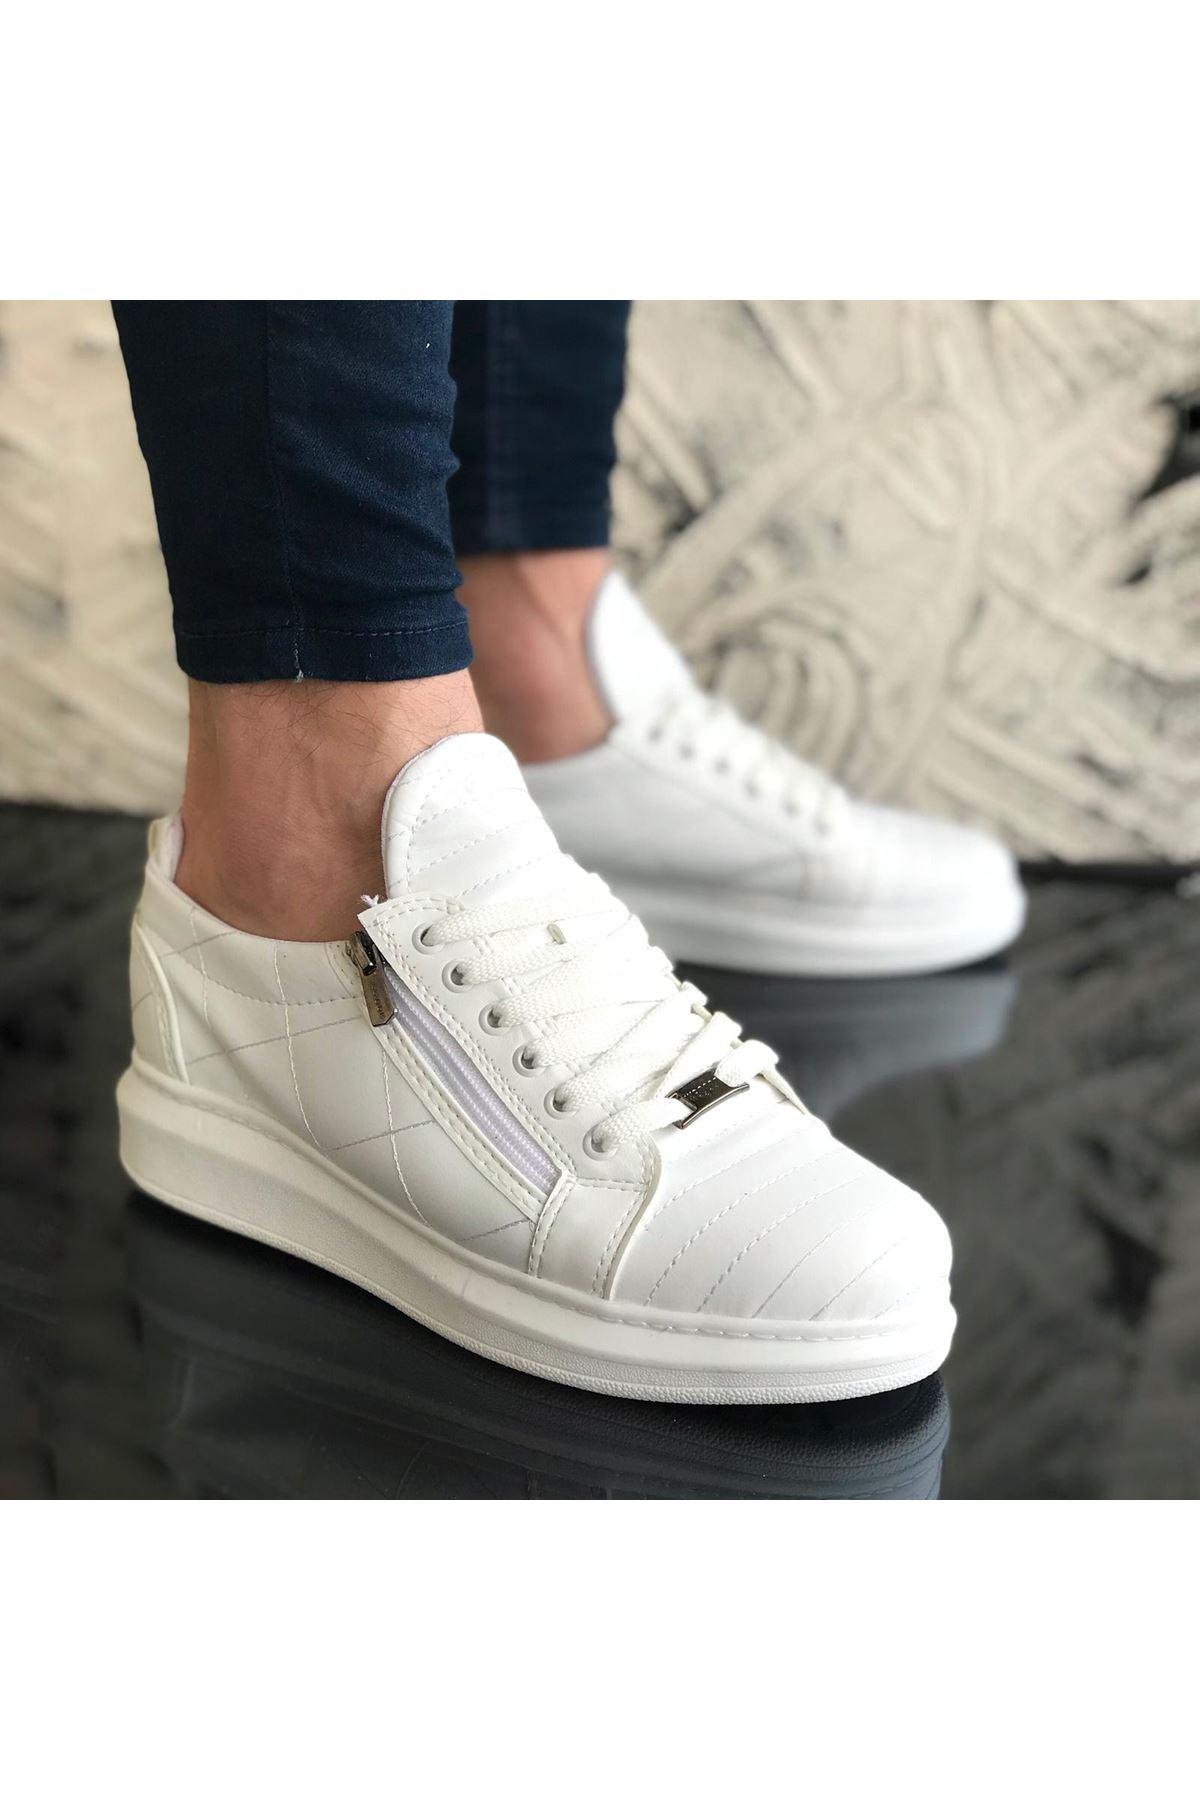 WG502 White Men's Casual Shoes - STREET MODE ™